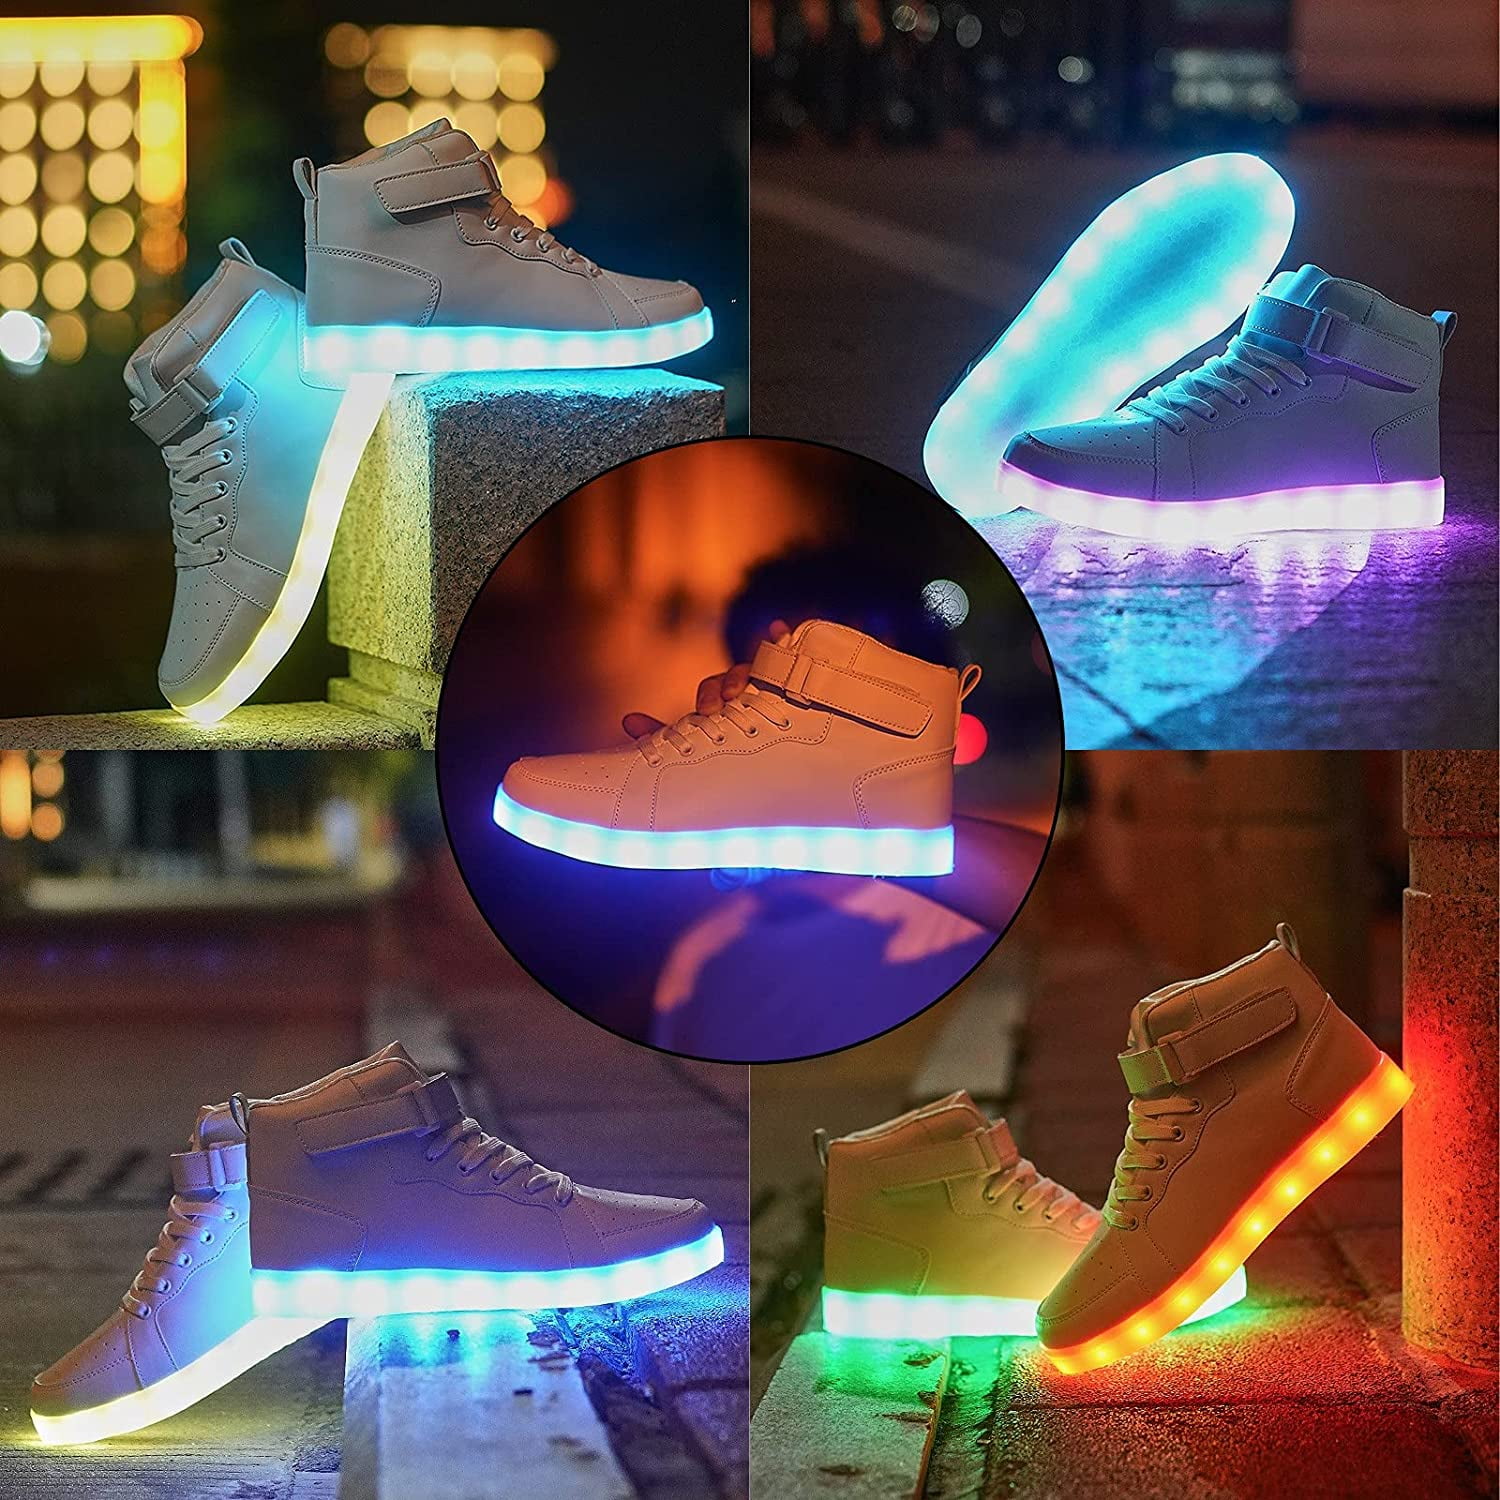  PYYIQI LED Light Up Shoes for Women Men Sports LED Shoes  Dancing Sneakers Low-Top USB Charging Shoes for Festivals, Christmas,  Halloween, New Year Party with USB Charging, Black 35